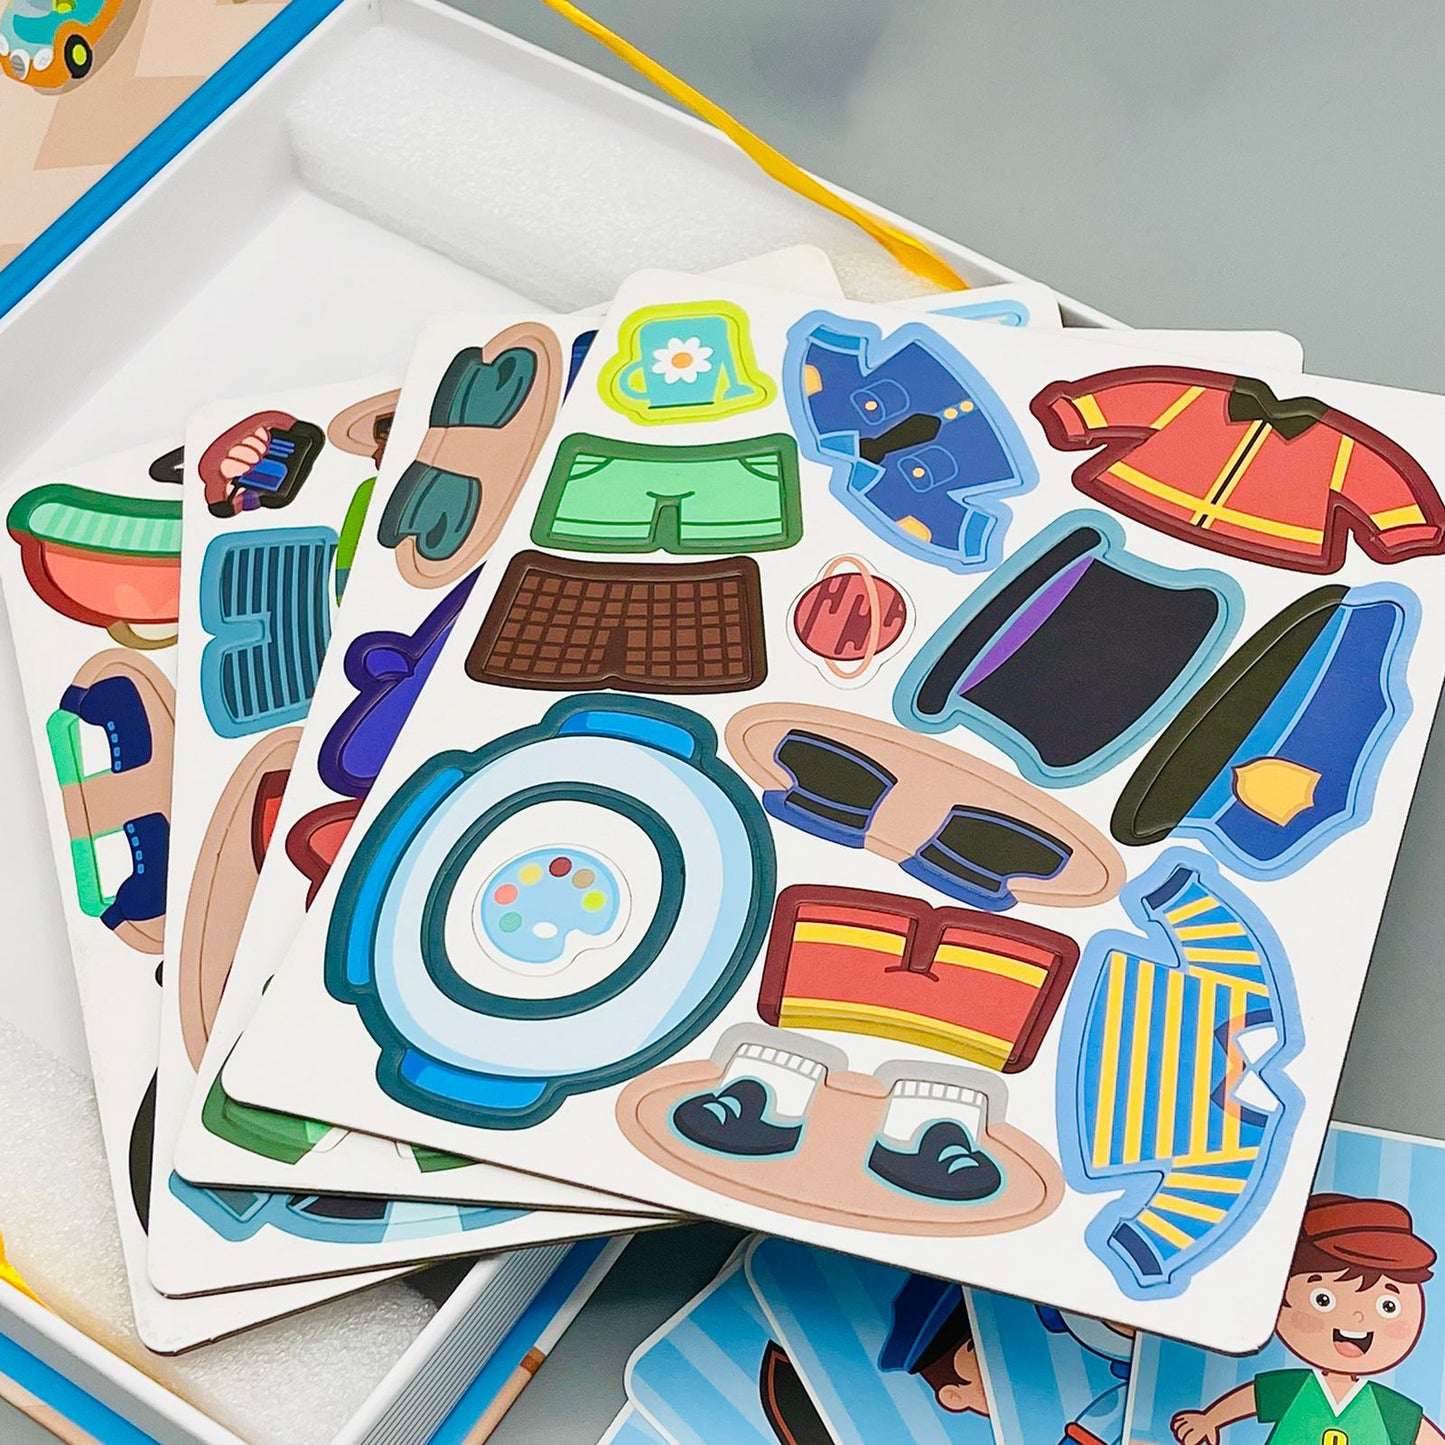 Magnetic Book Puzzle For Kids Learning, Education and Cognition Development